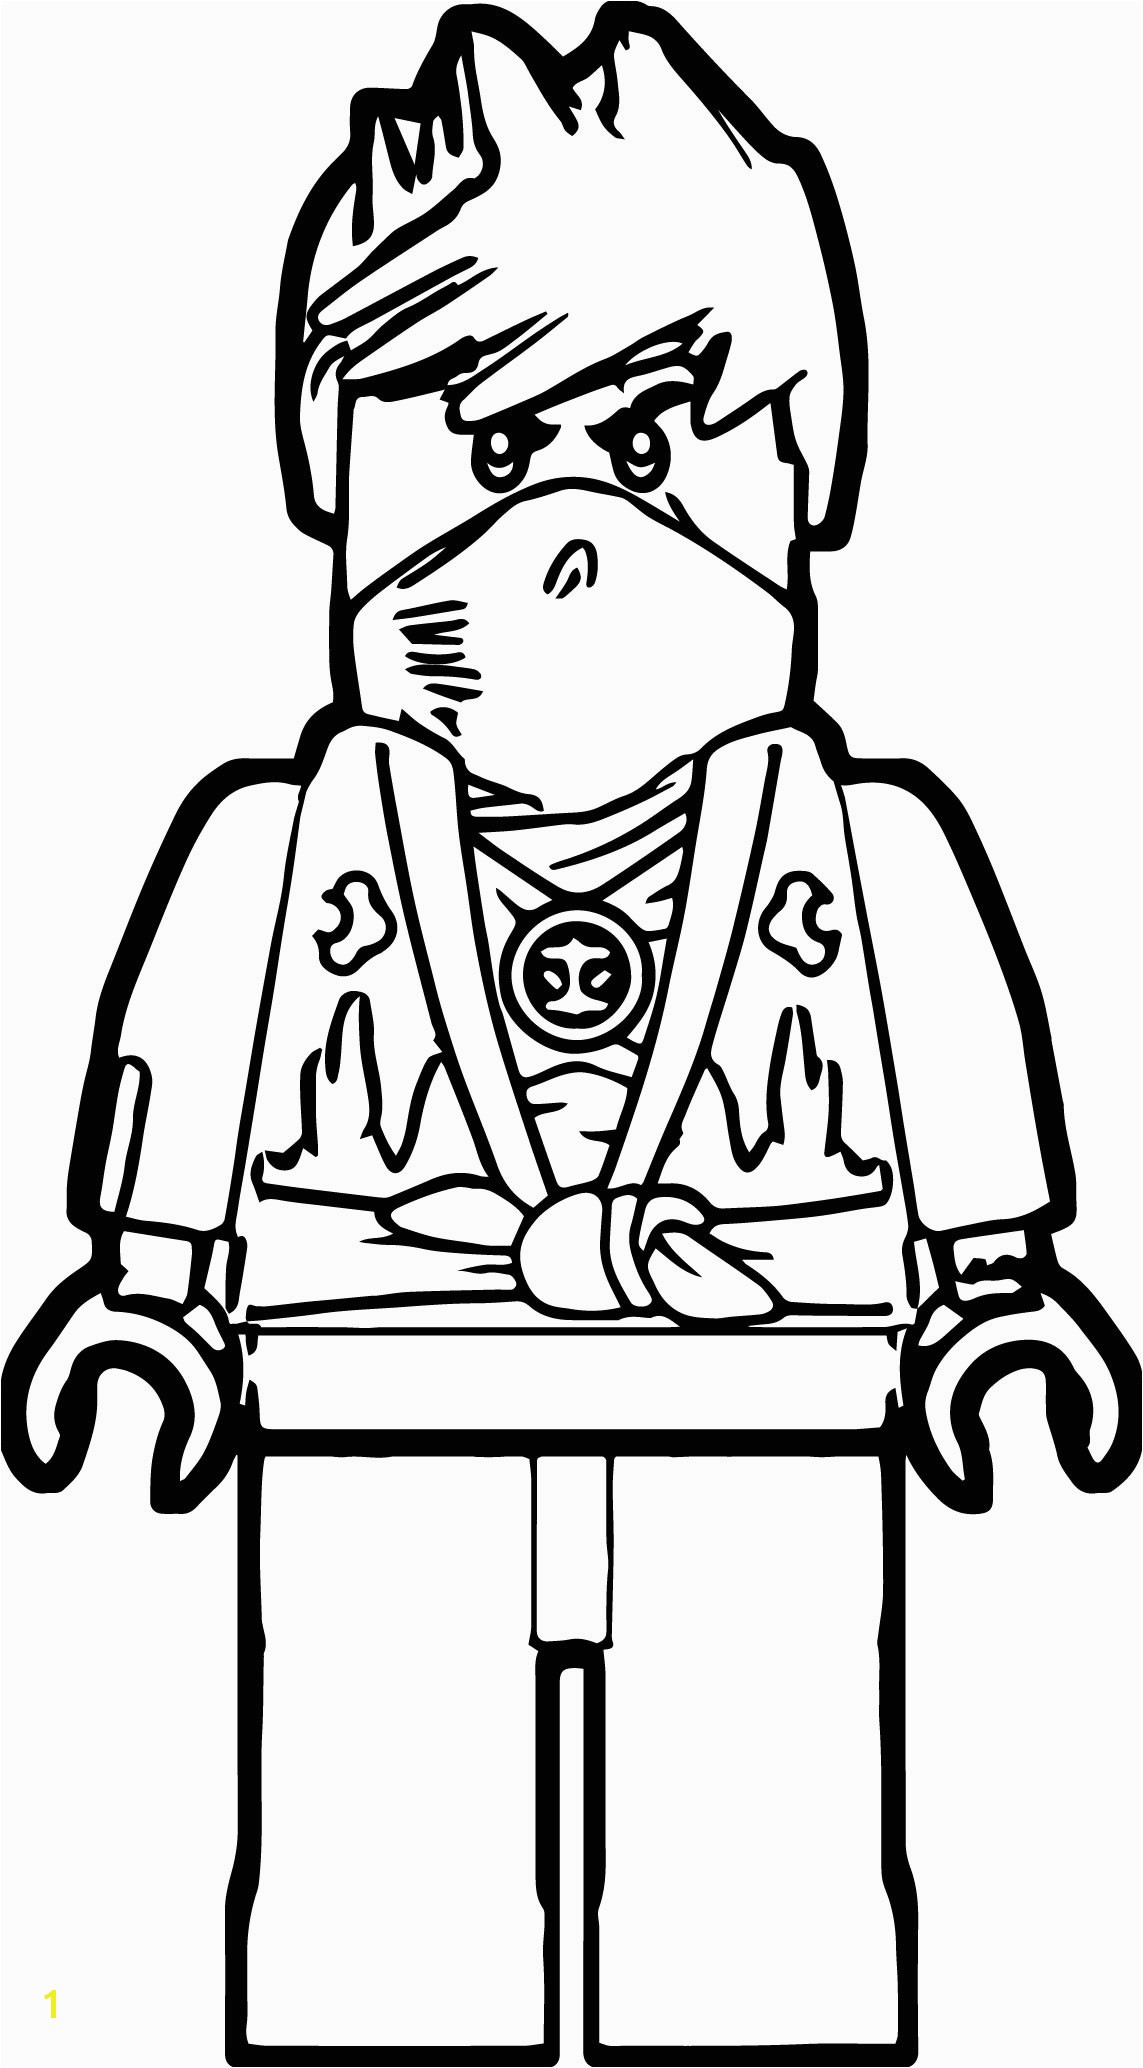 Lego Ninjago Rebooted Coloring Pages Lego Ninjago Rebooted Coloring Pages Coloring Pages